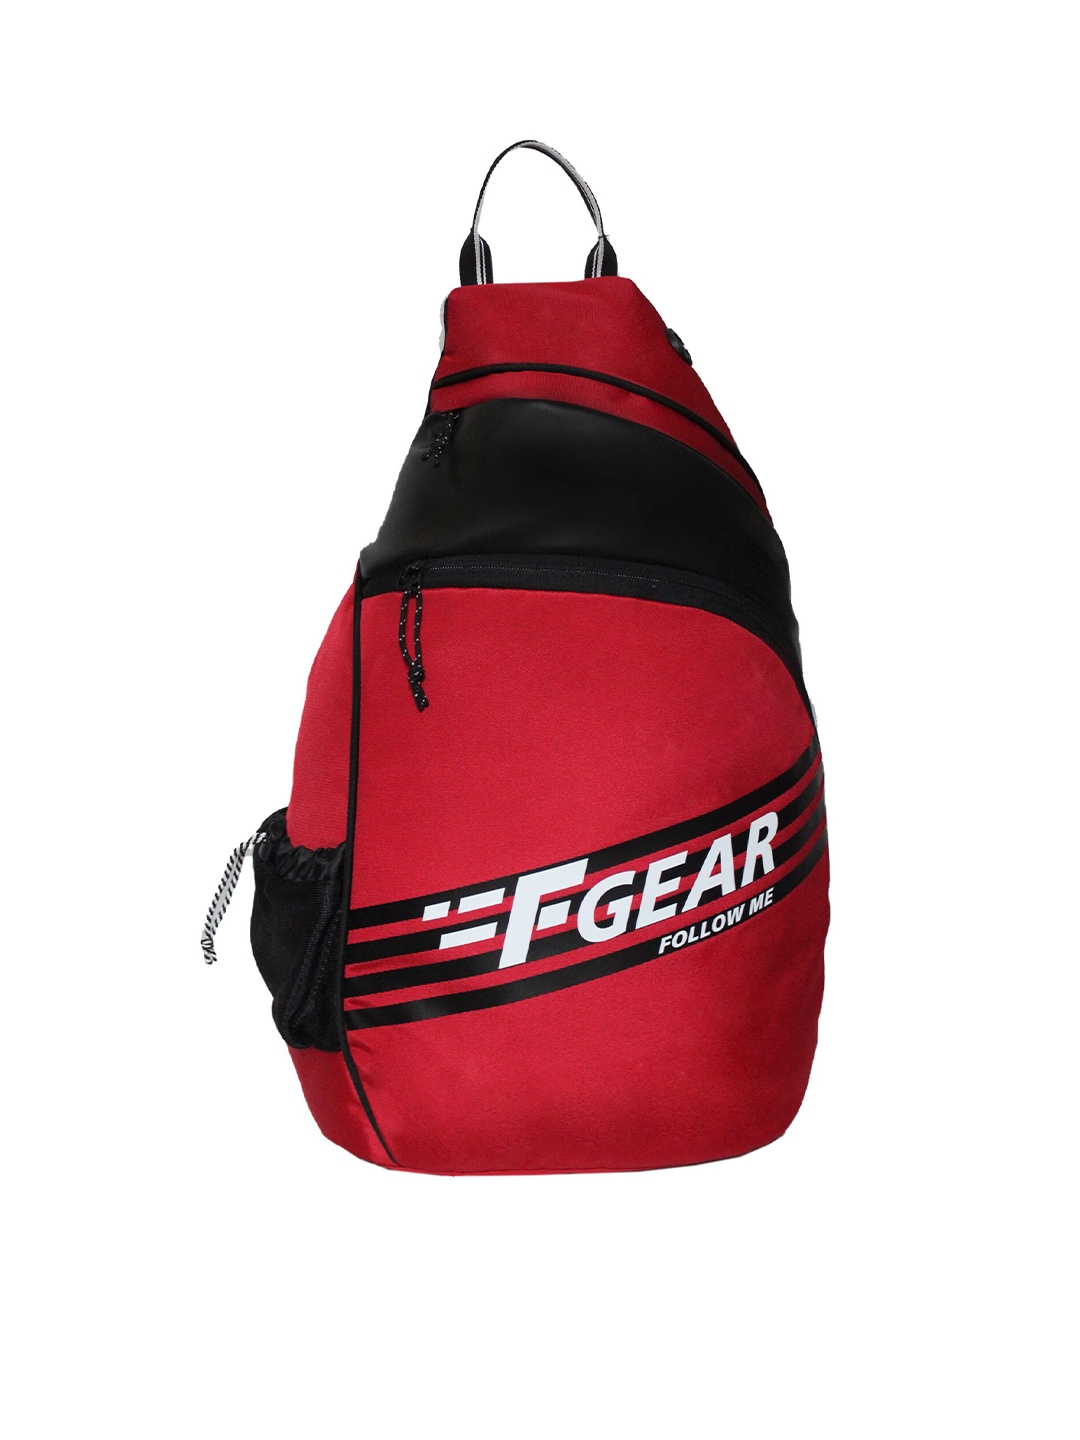 F Gear Unisex Red   Black Backpack